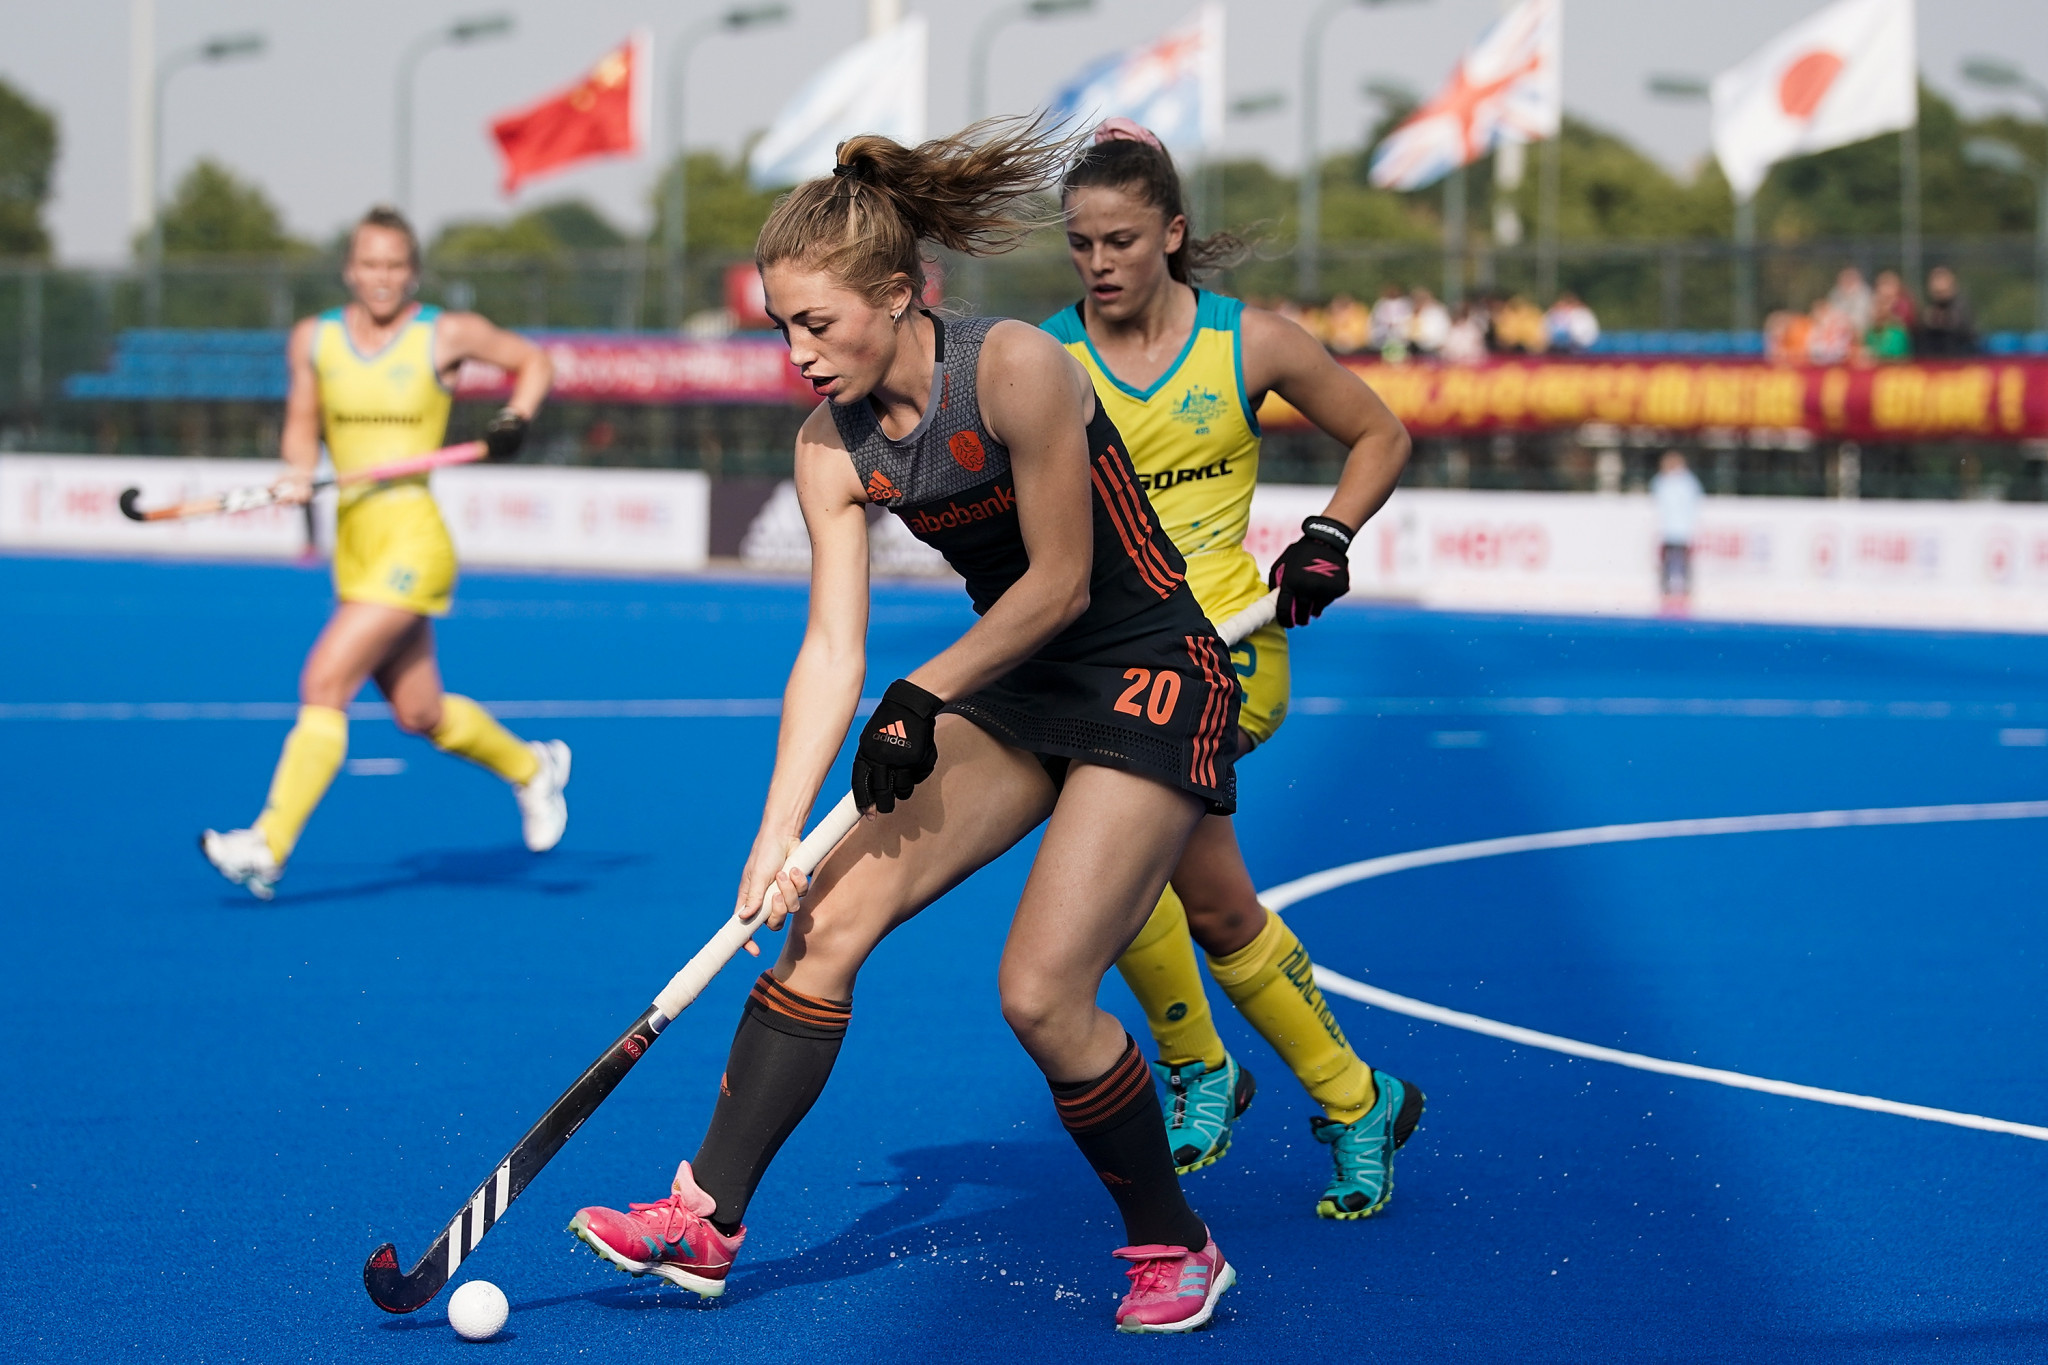 Netherlands unbeaten at FIH Women's Hockey Champions Trophy after victory over Australia